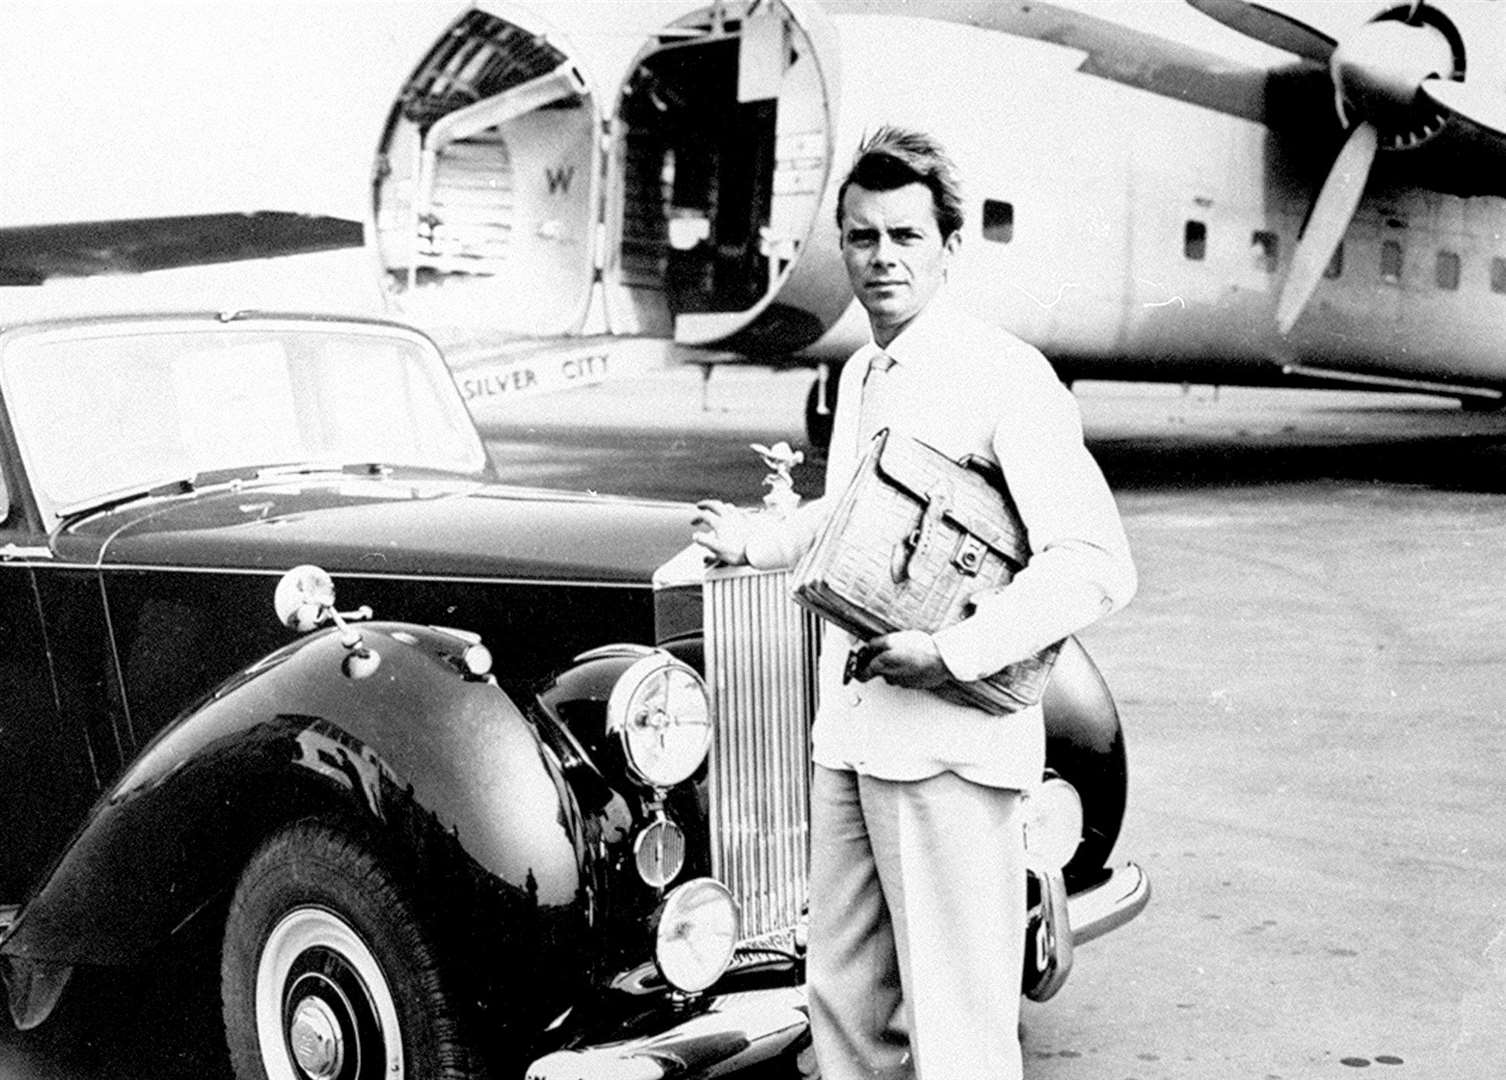 Dirk Bogarde - English actor and writer - taken to the tarmac of his limousine